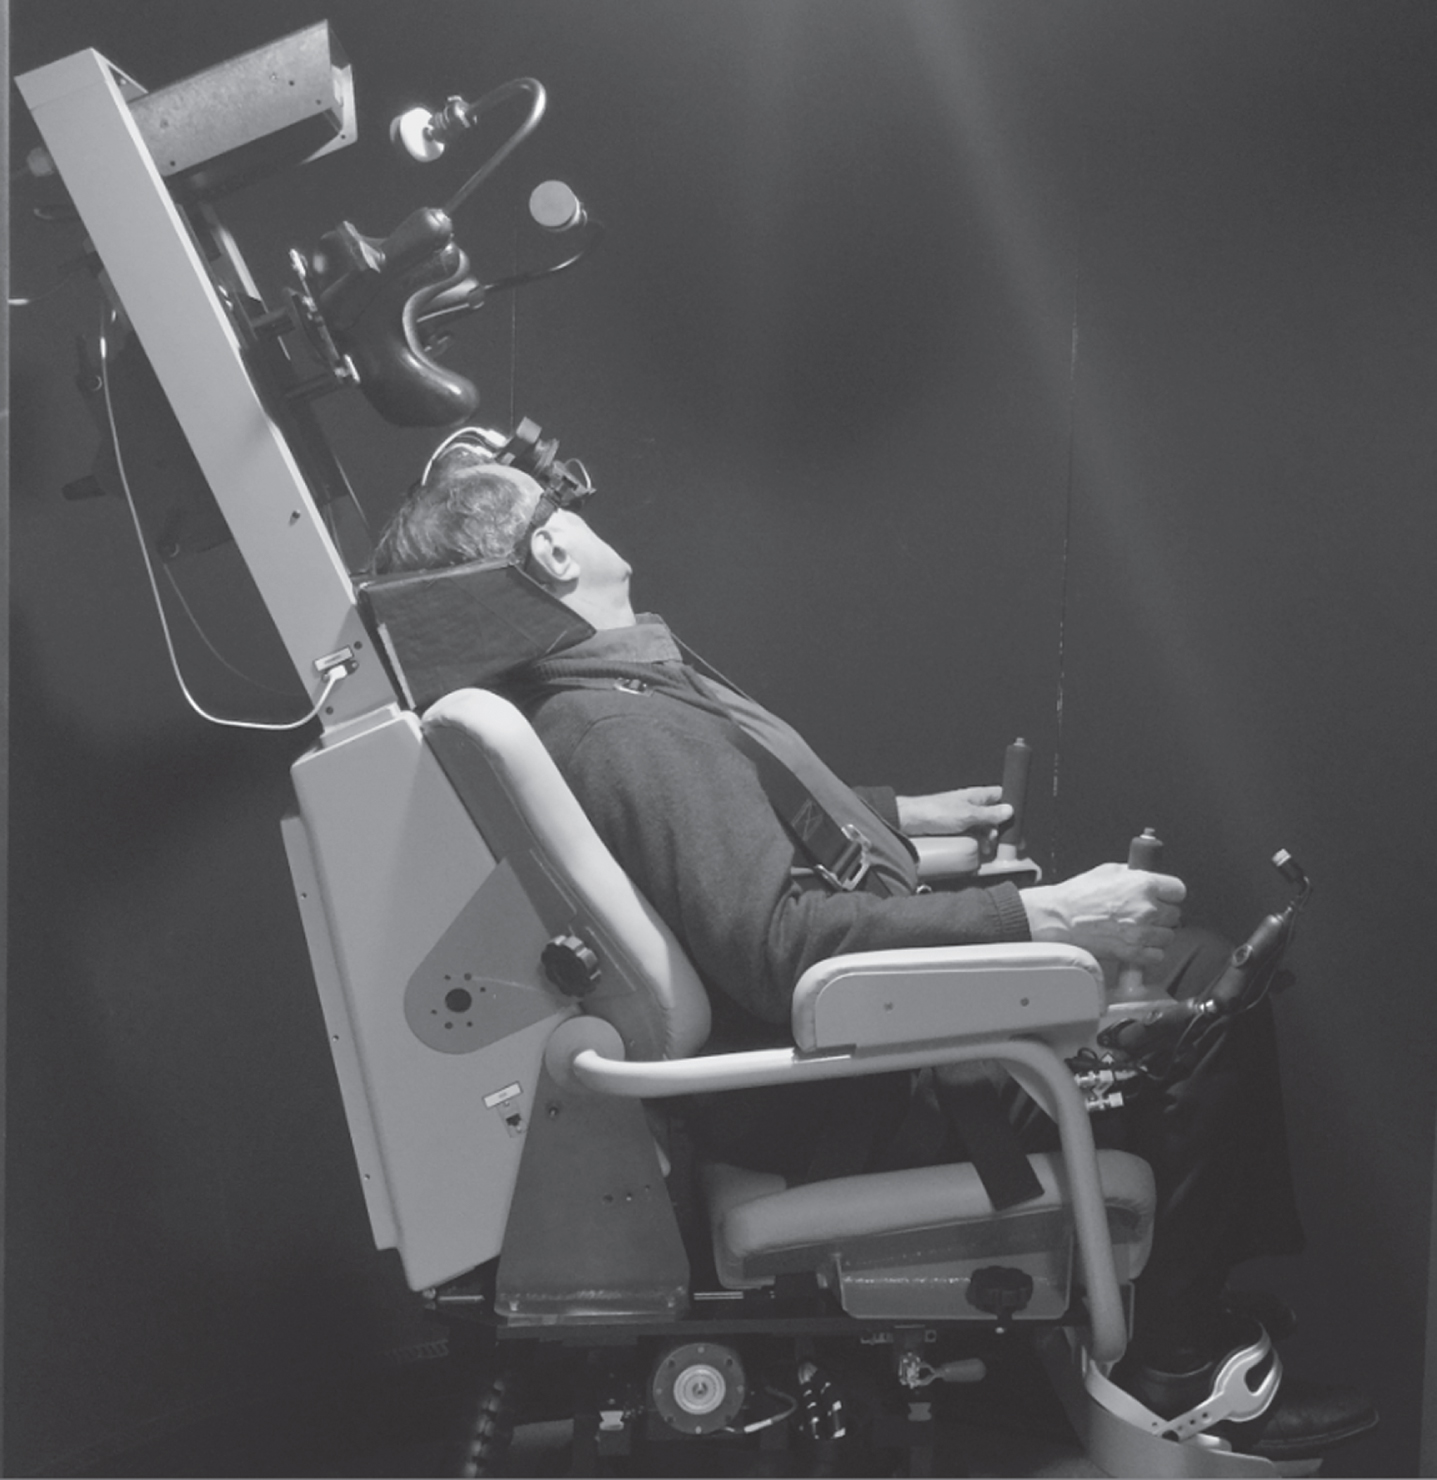 Subject seated in the computerized rotational head impulse test (crHIT) device. The subject is seated in the LARP testing position, which requires the LARP plane to be earth-horizontal because the axis of rotation of the crHIT device is earth-vertical.